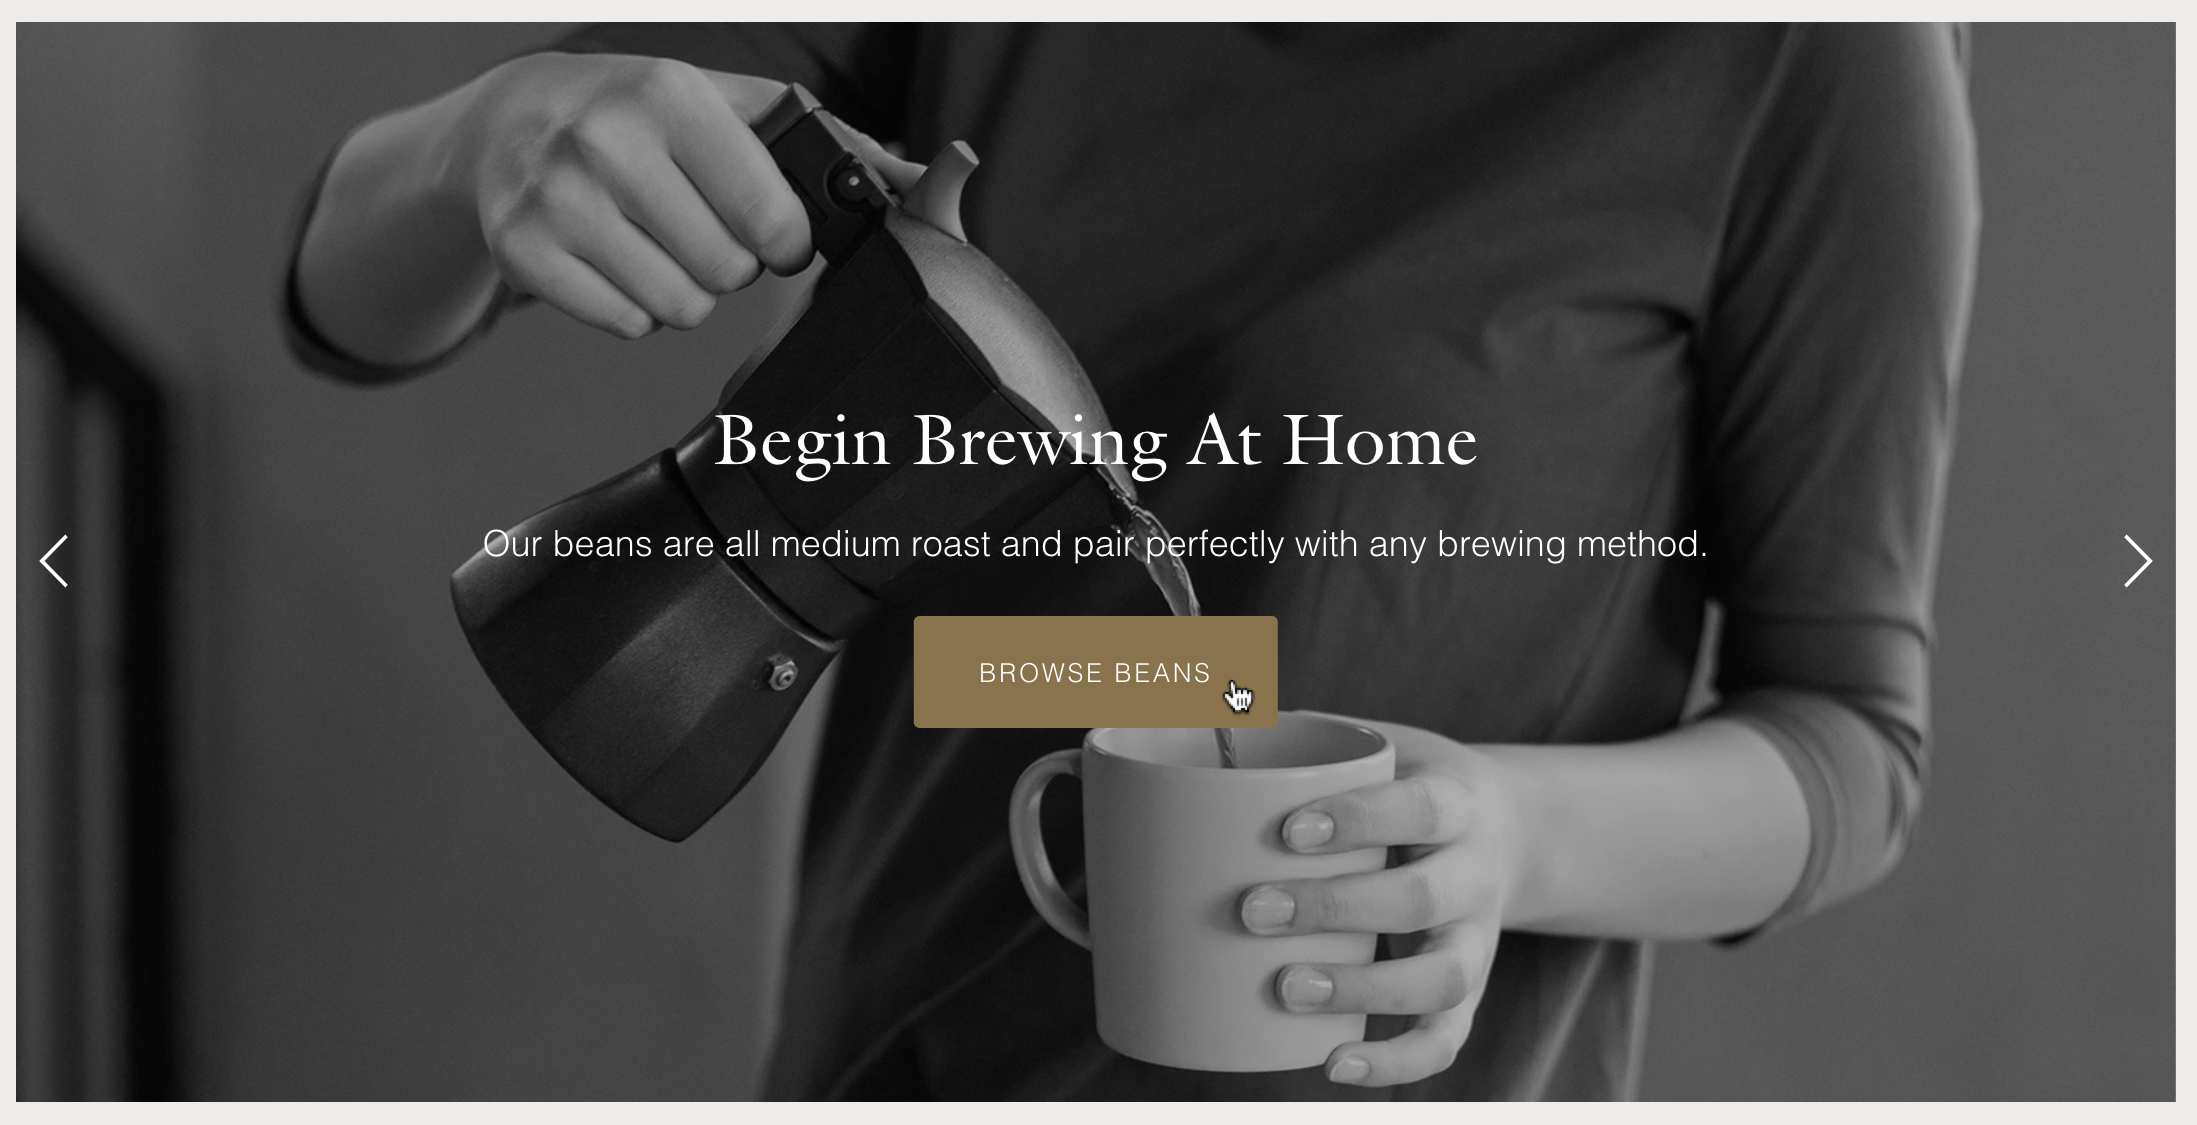 slideshow_with_hands_pouring_coffee_image.png